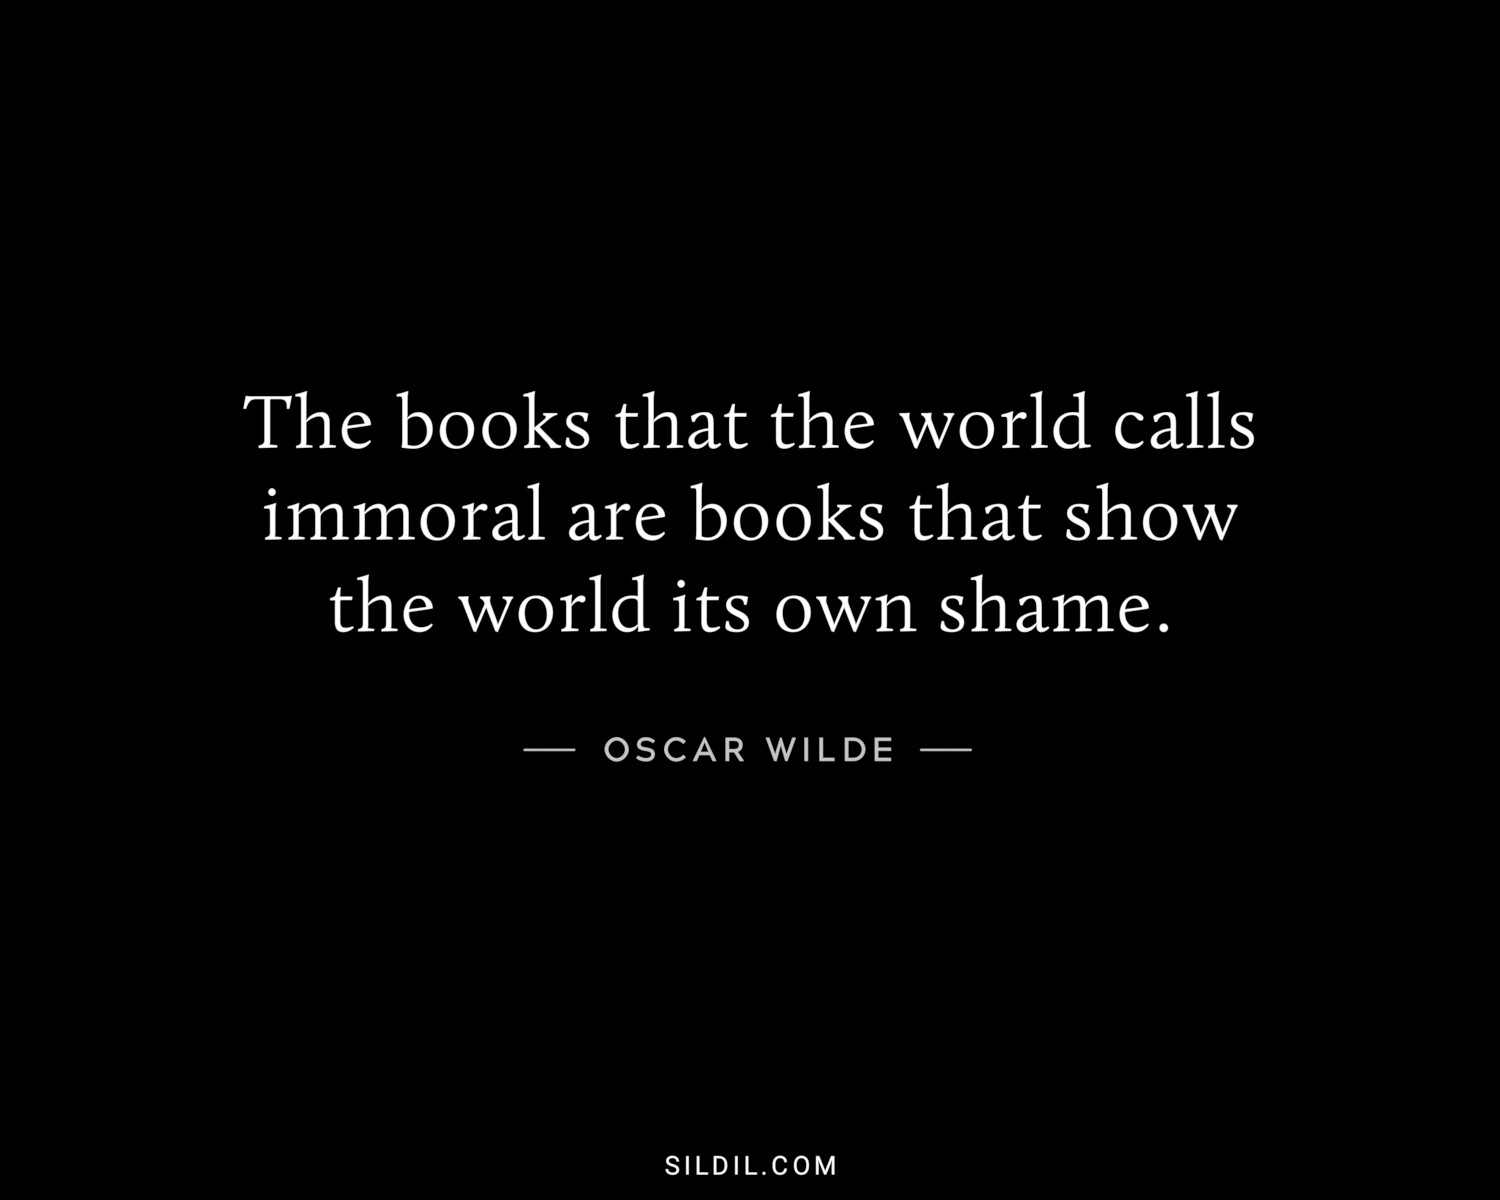 The books that the world calls immoral are books that show the world its own shame.